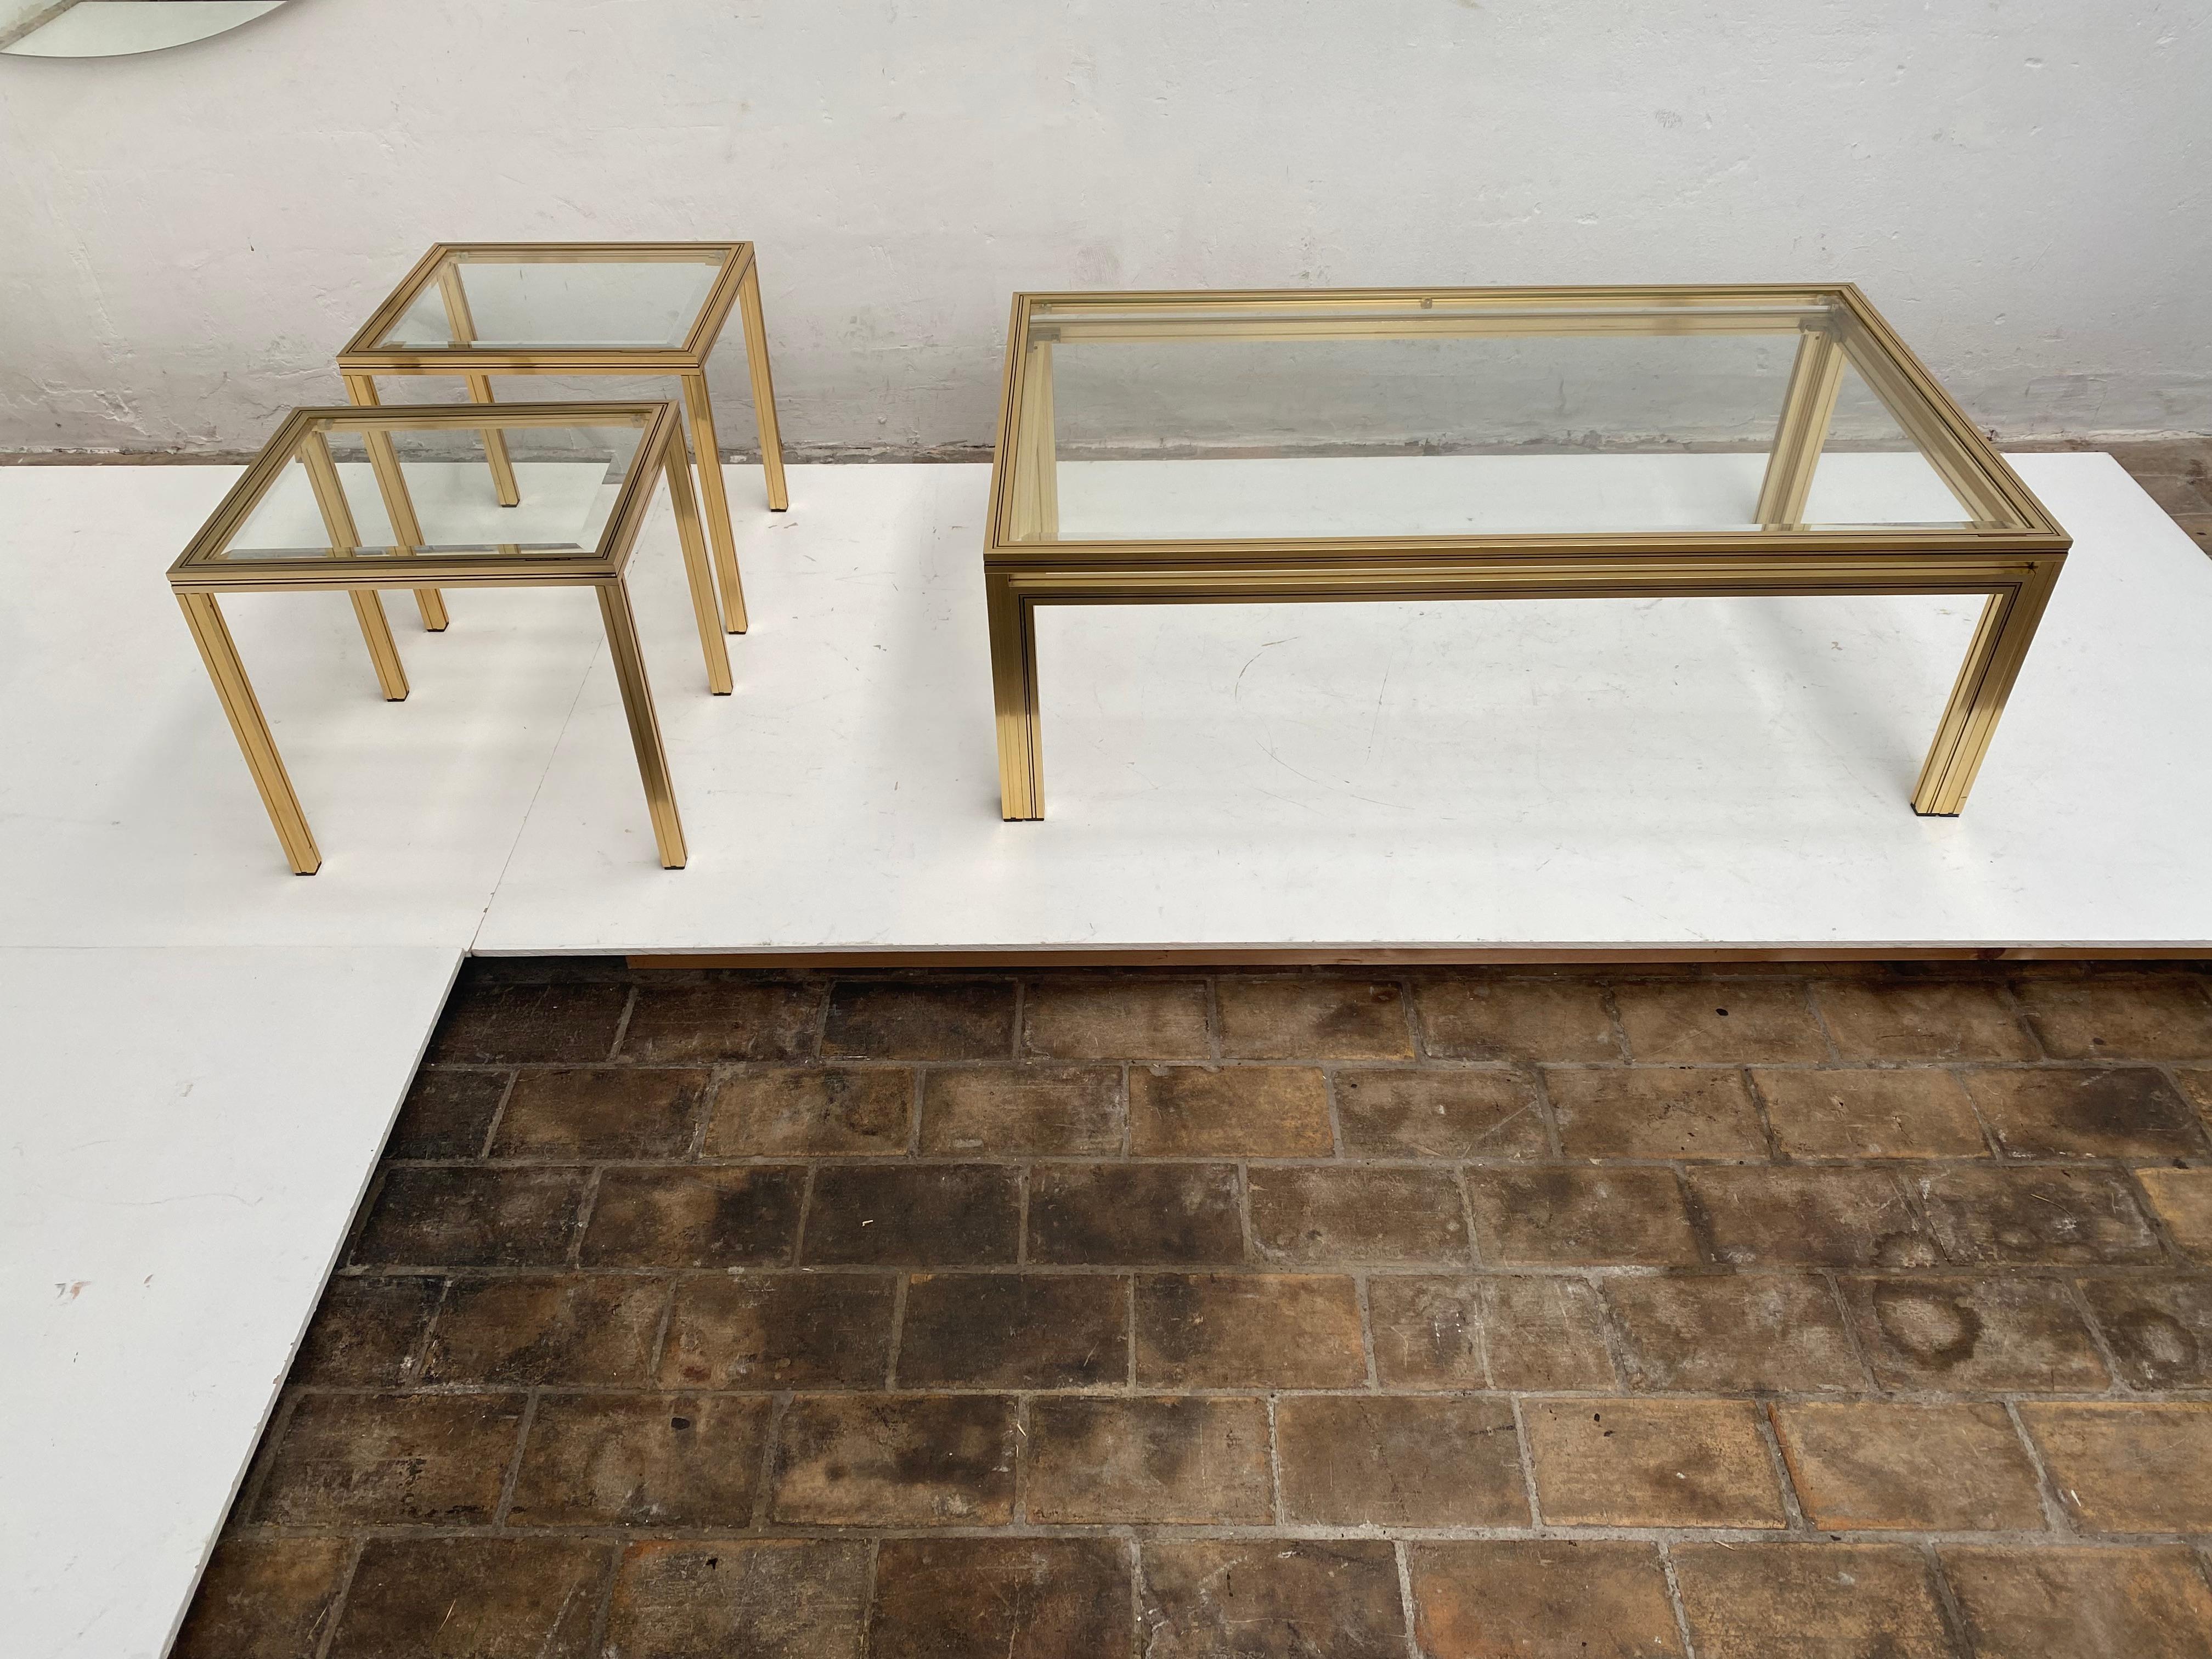 1970's Pierre Vandel Paris Coffee Table + 2 Side Tables Gold Anodized Aluminium In Good Condition For Sale In bergen op zoom, NL